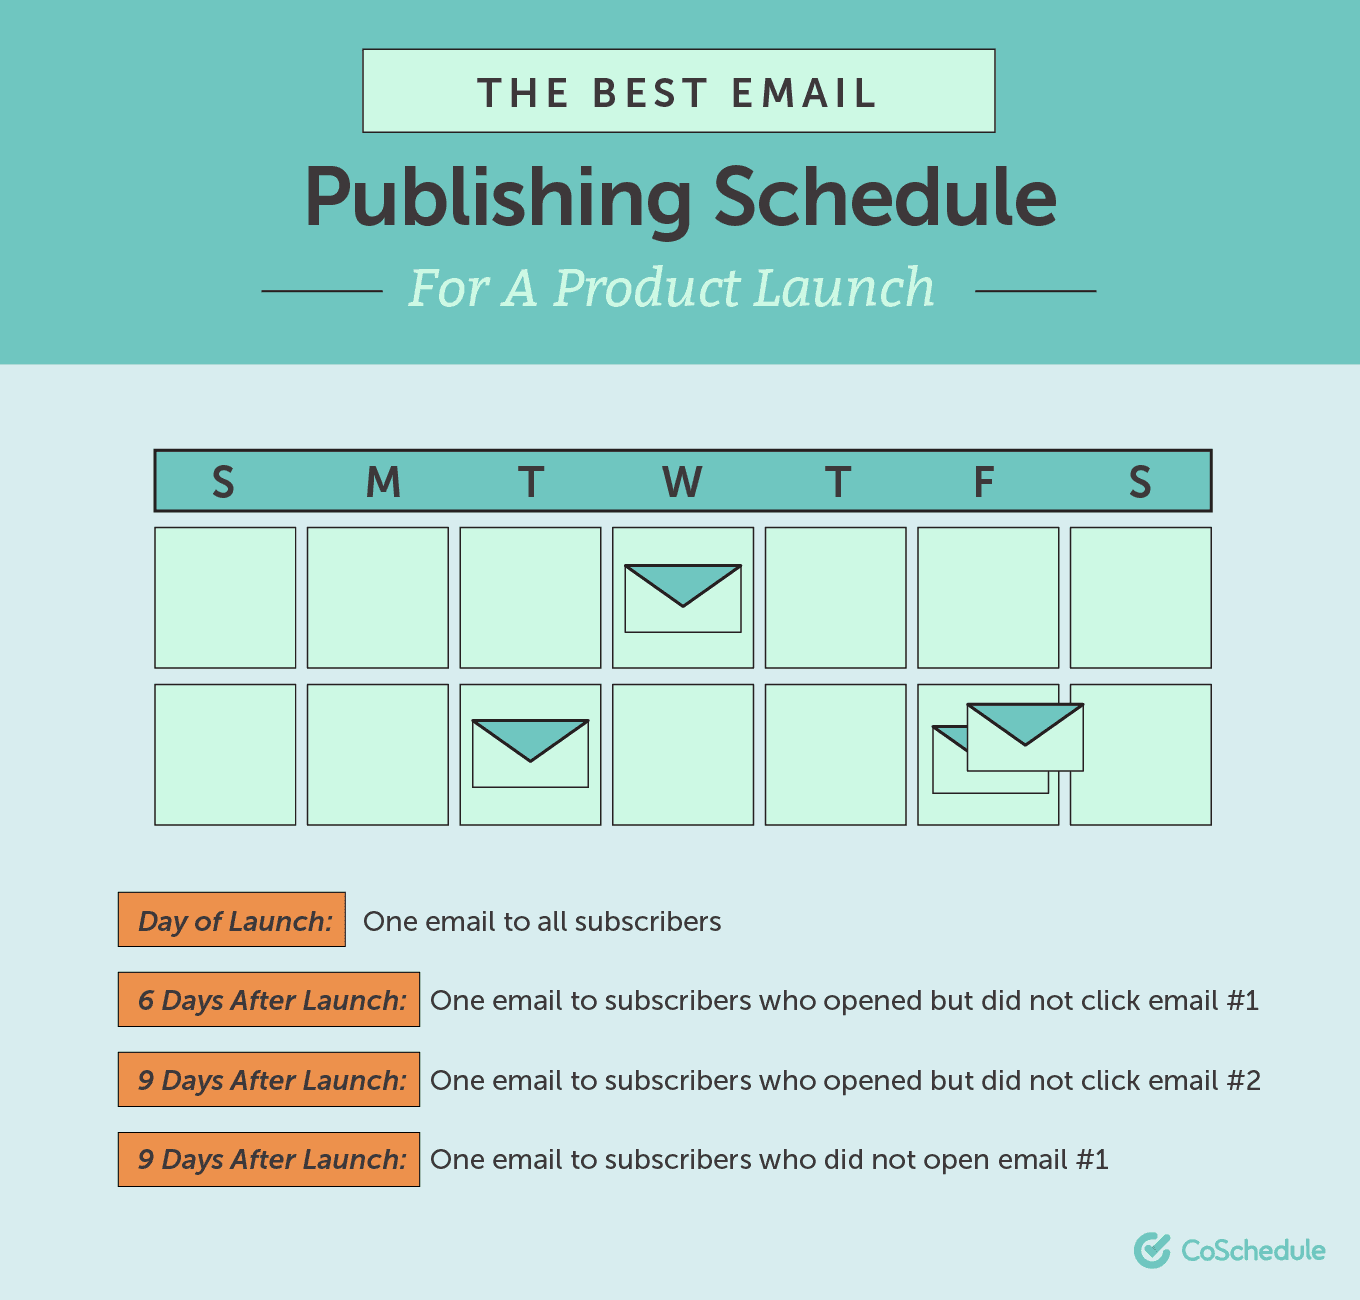 Best email publishing schedule for product launch